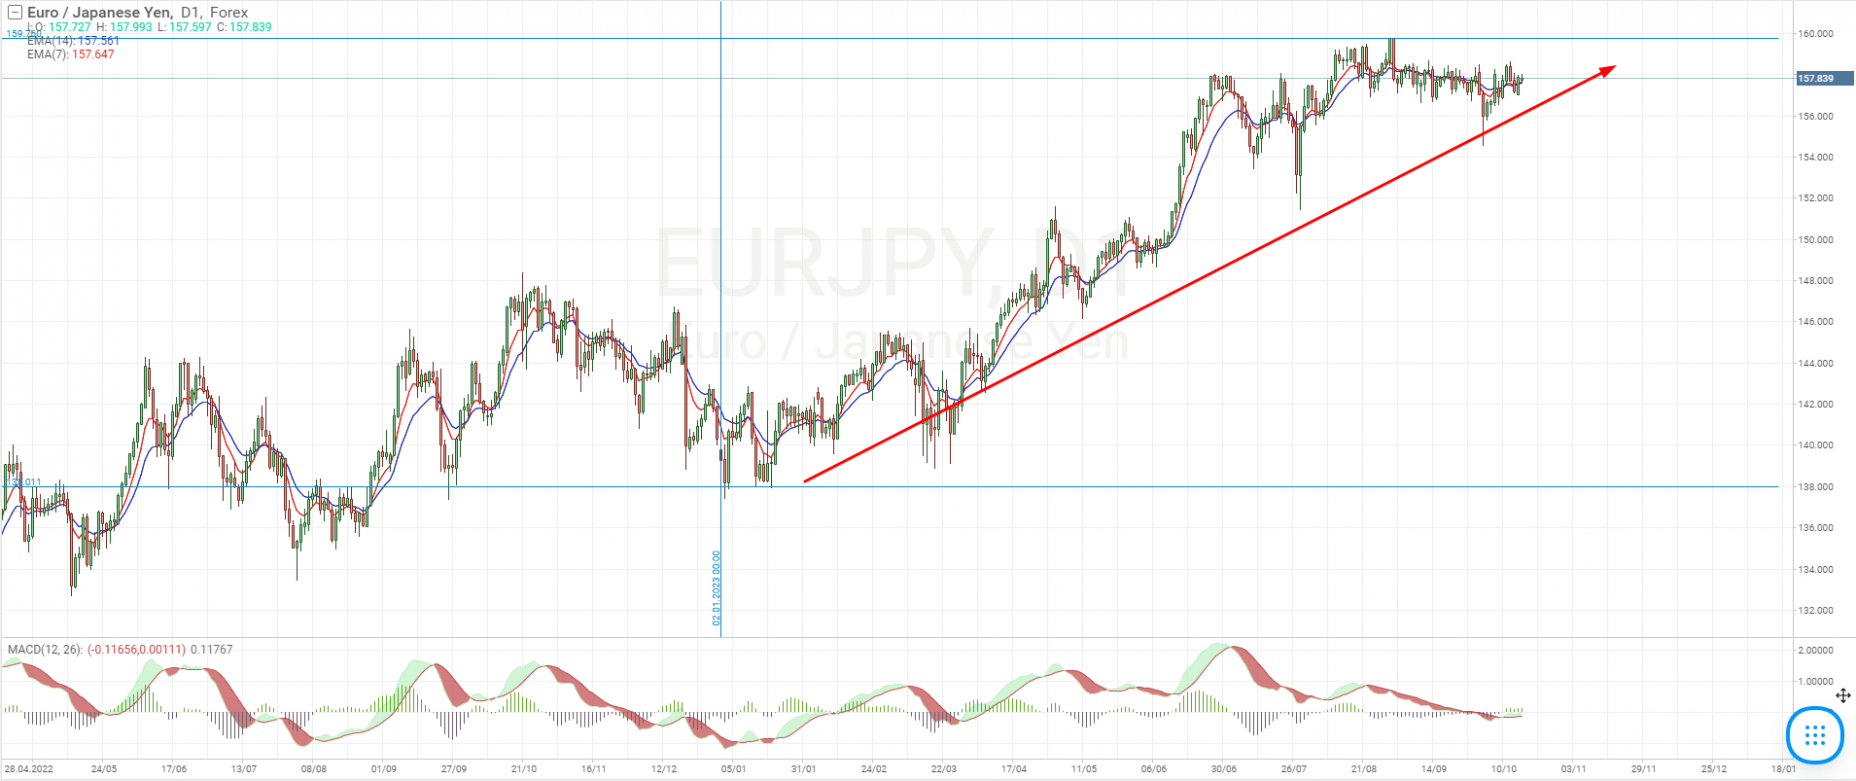 EUR/JPY currency pair chart